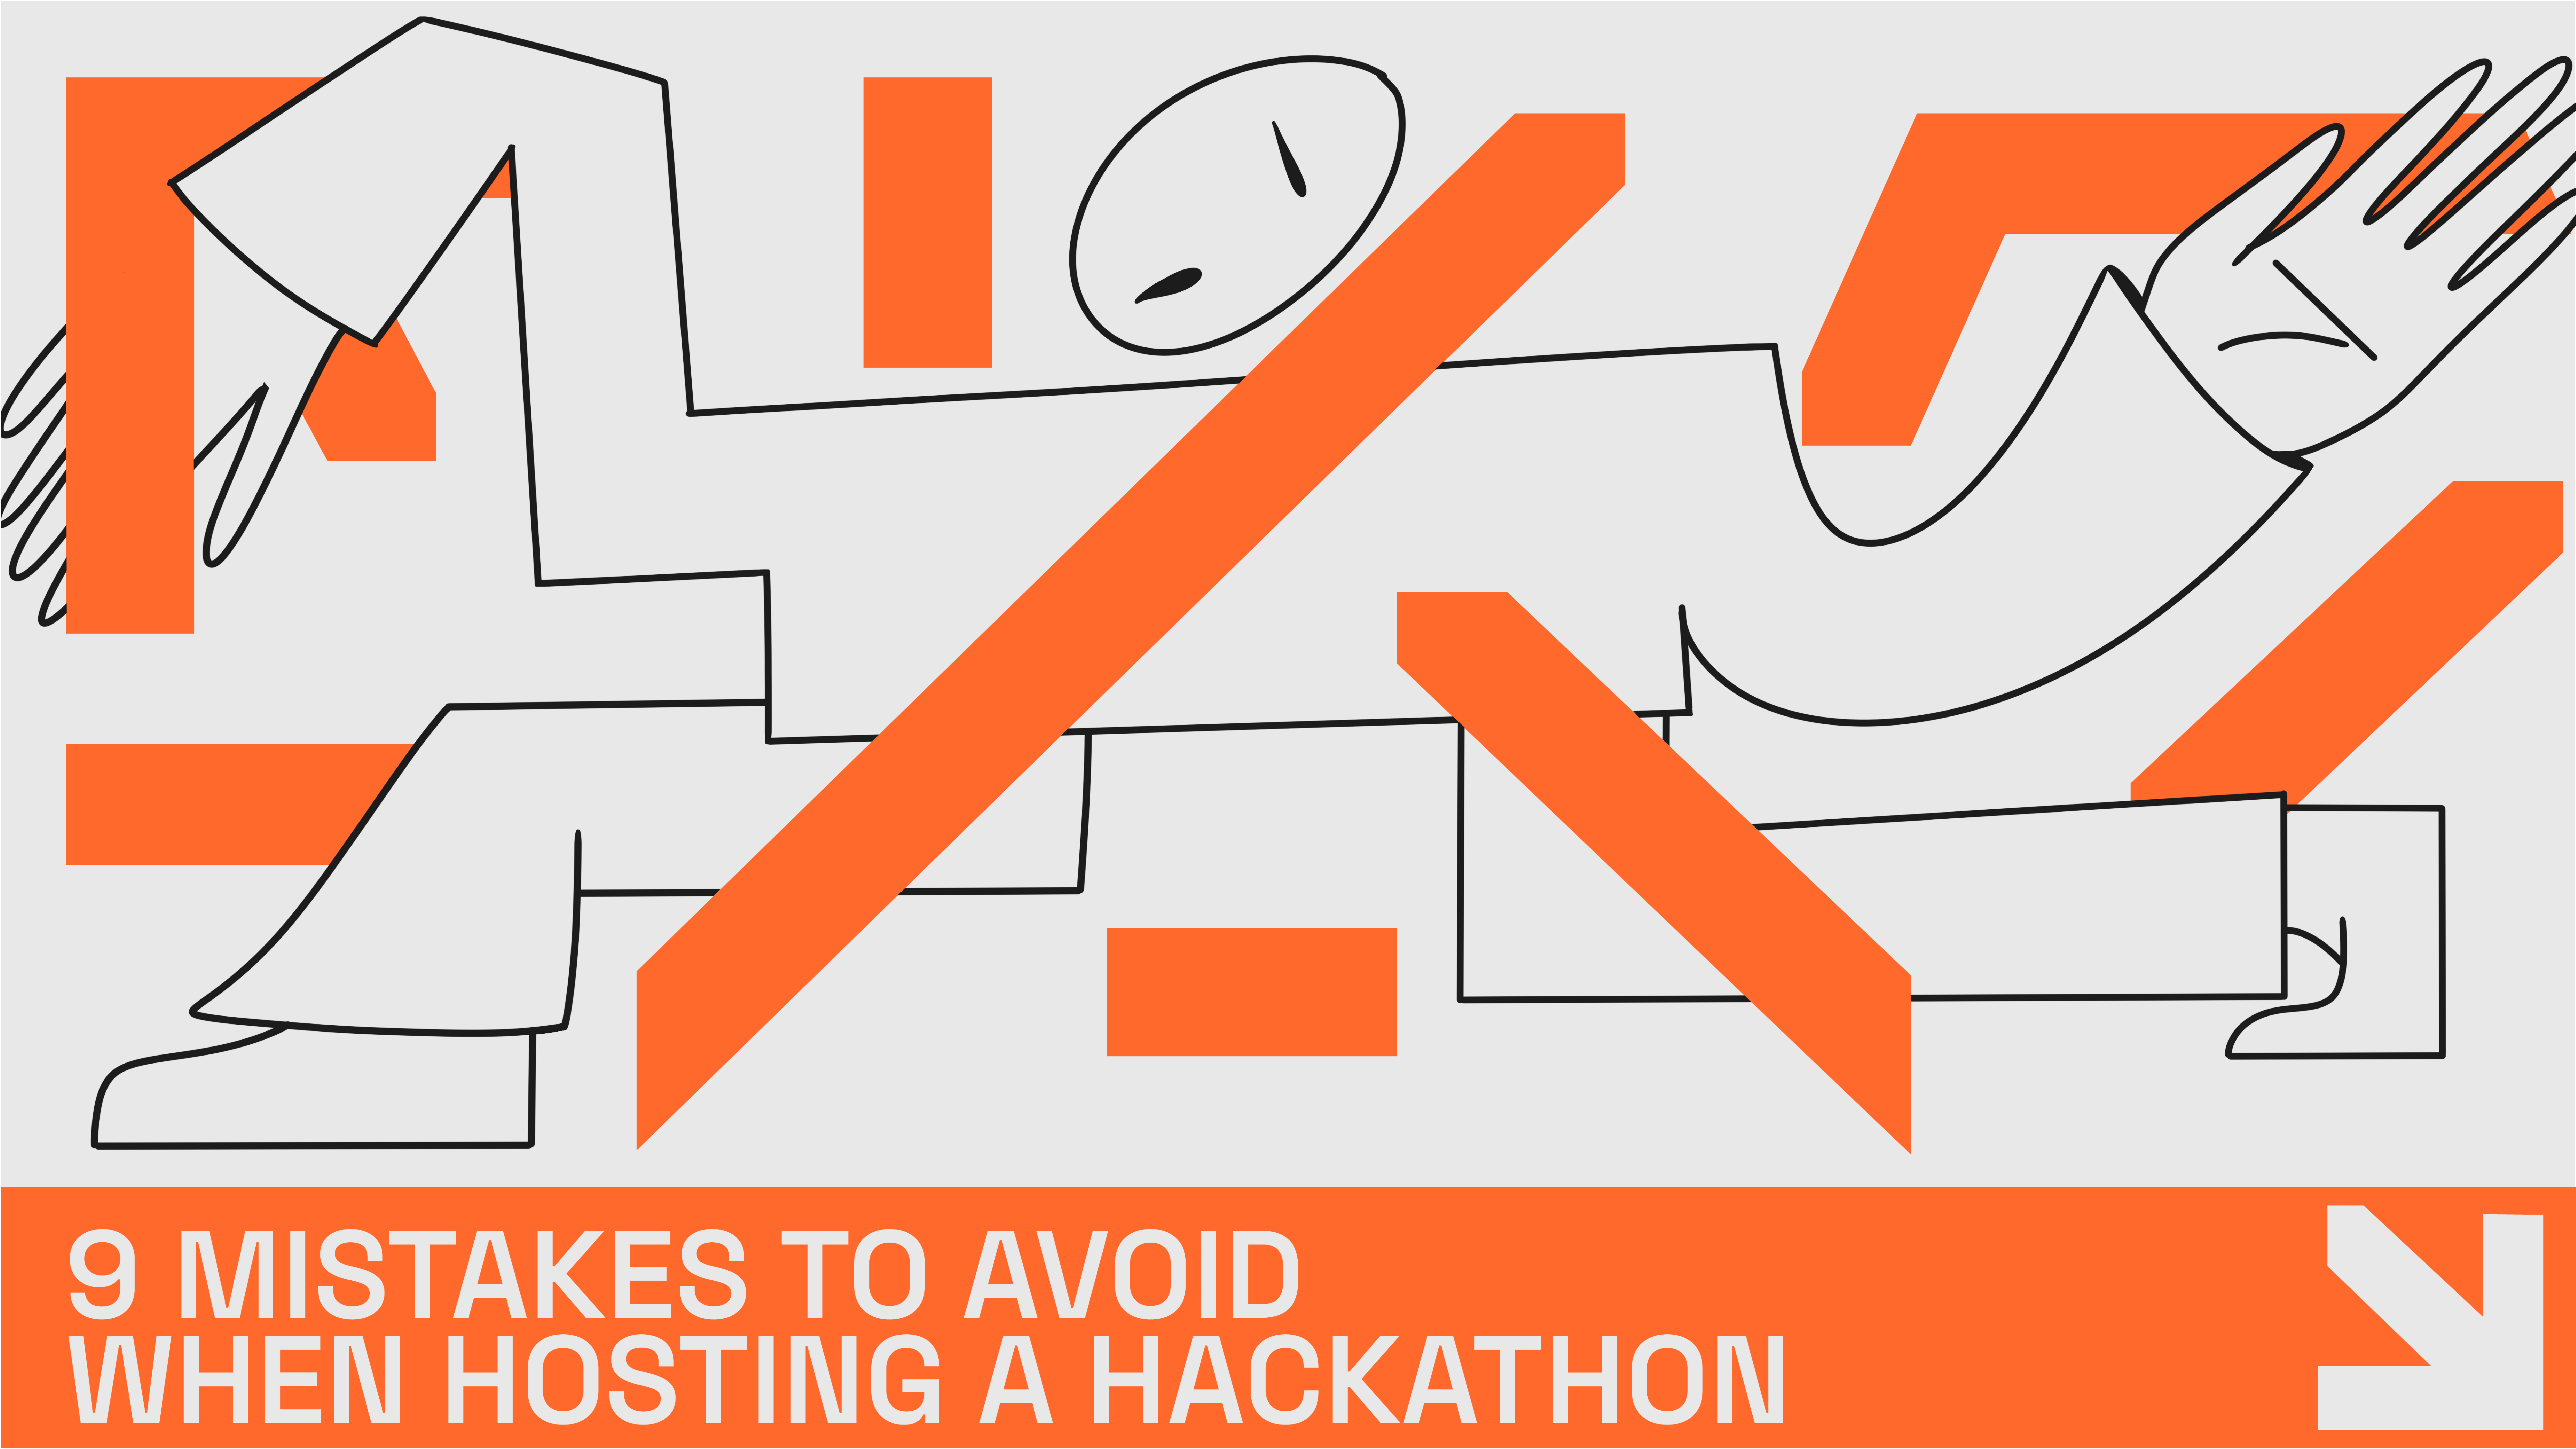 9 Mistakes to avoid when hosting an hackathon